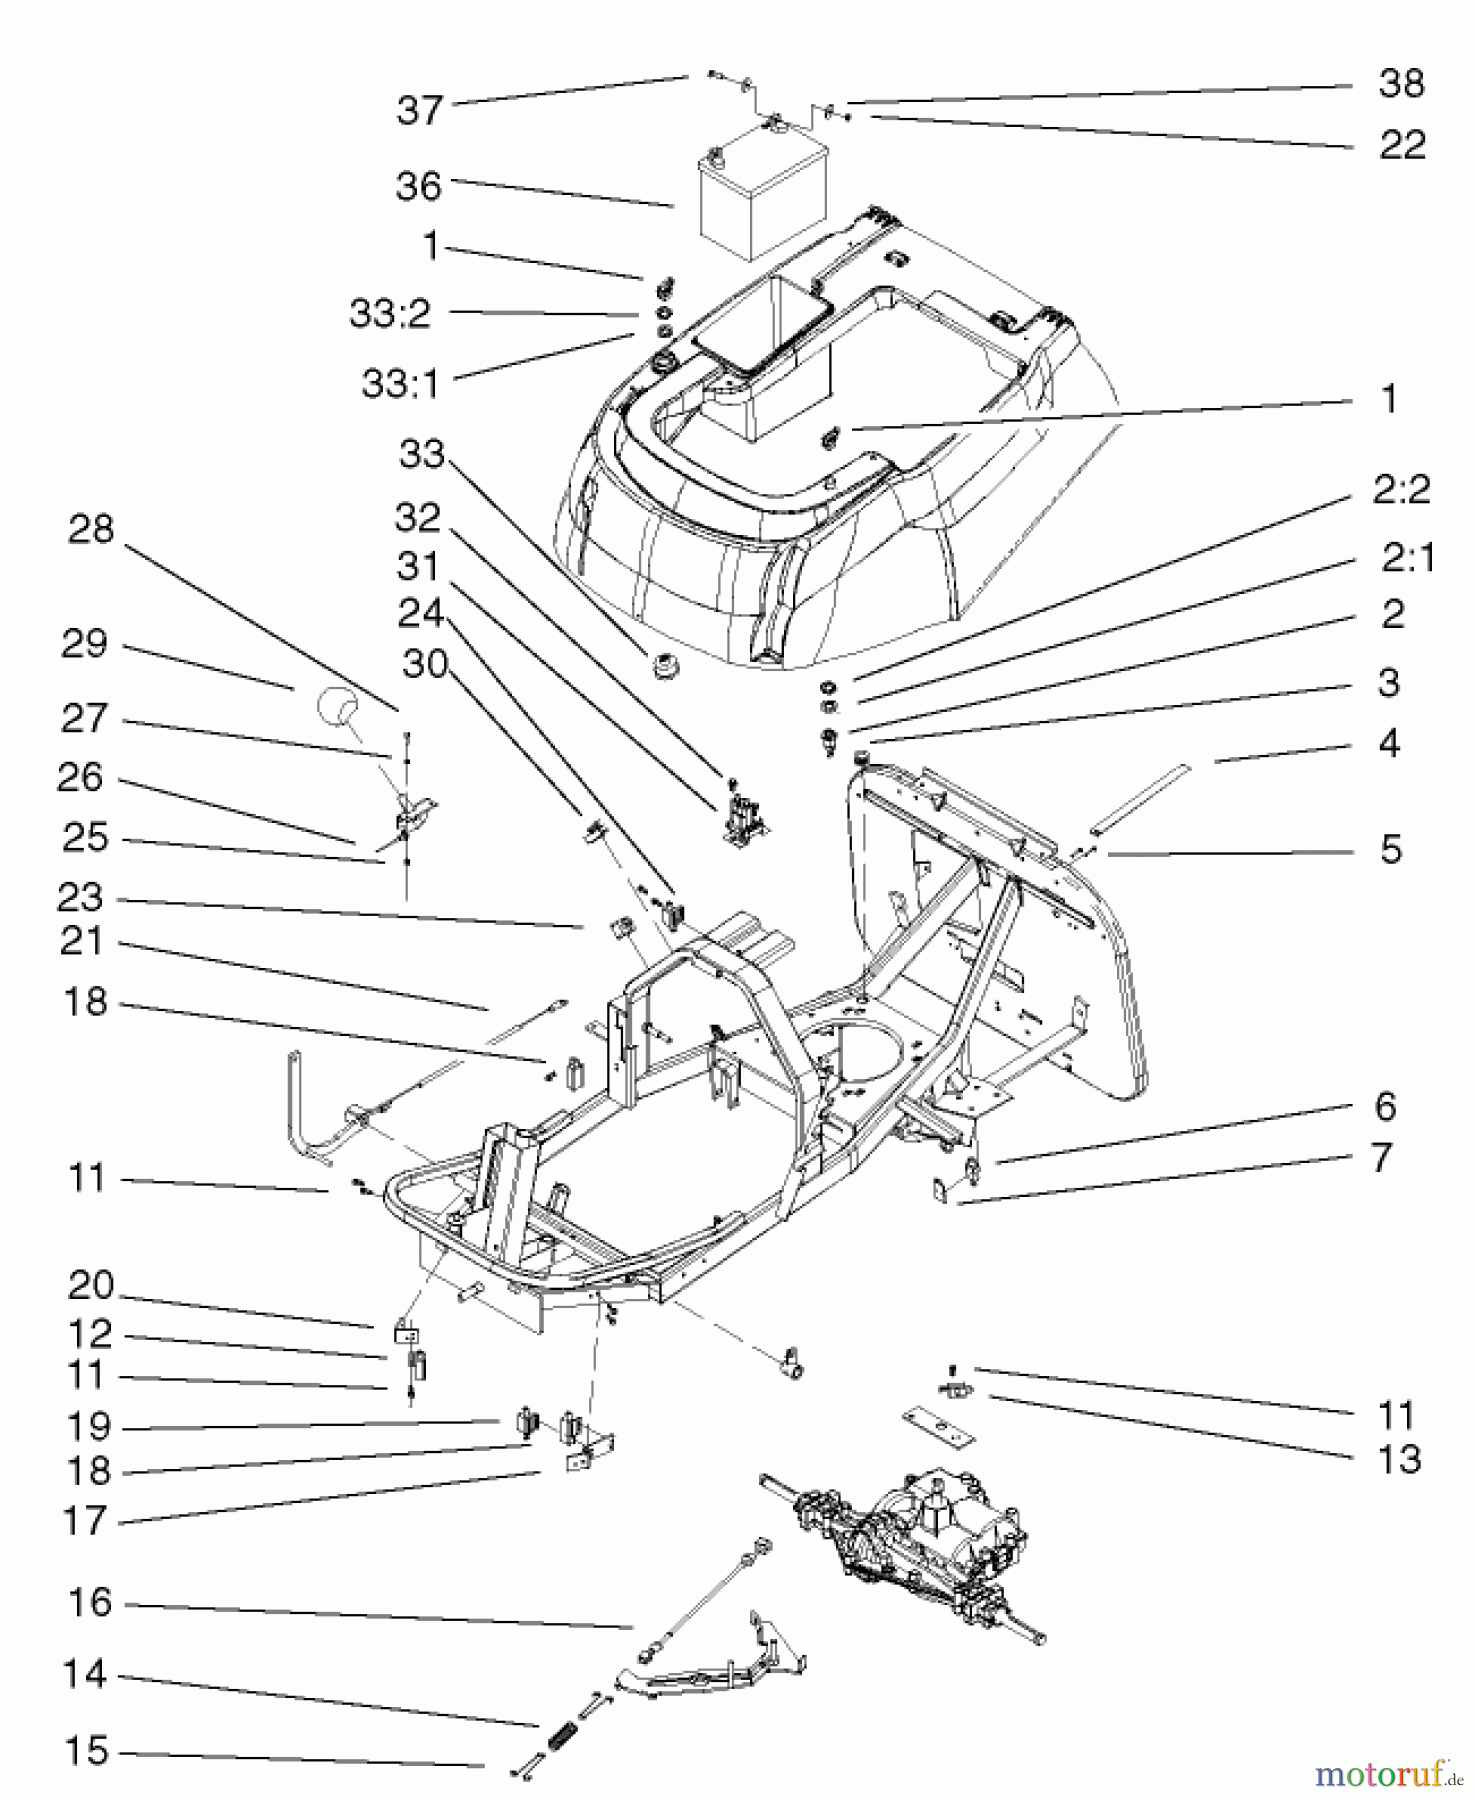  Toro Neu Mowers, Rear-Engine Rider 70184 (13-32H) - Toro 13-32H Rear Engine Rider, 2002 (220000001-220999999) ELECTRICAL AND CABLE ASSEMBLY